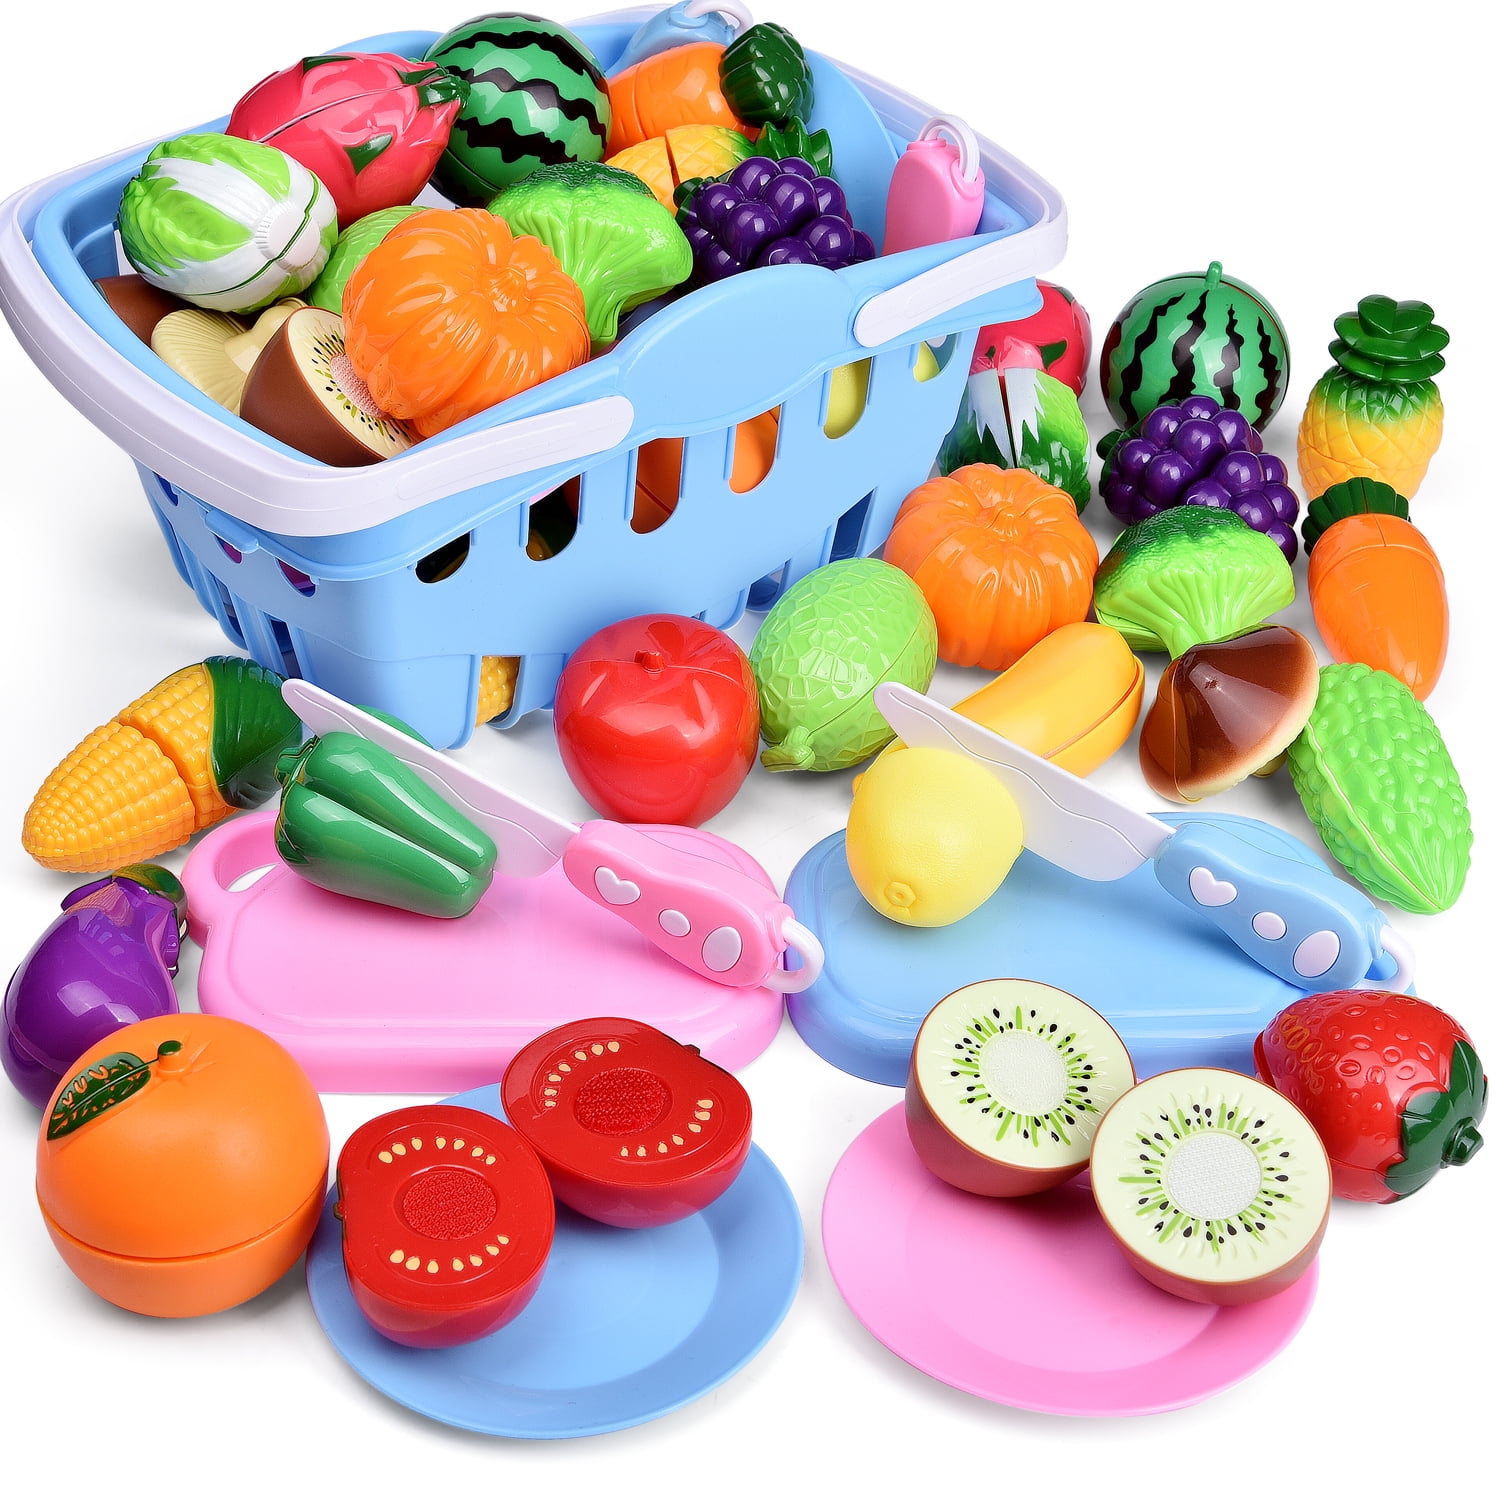 Cut Food Fruits And Vegetables Mushrooms Pretend Play Toys For Children Kids new 